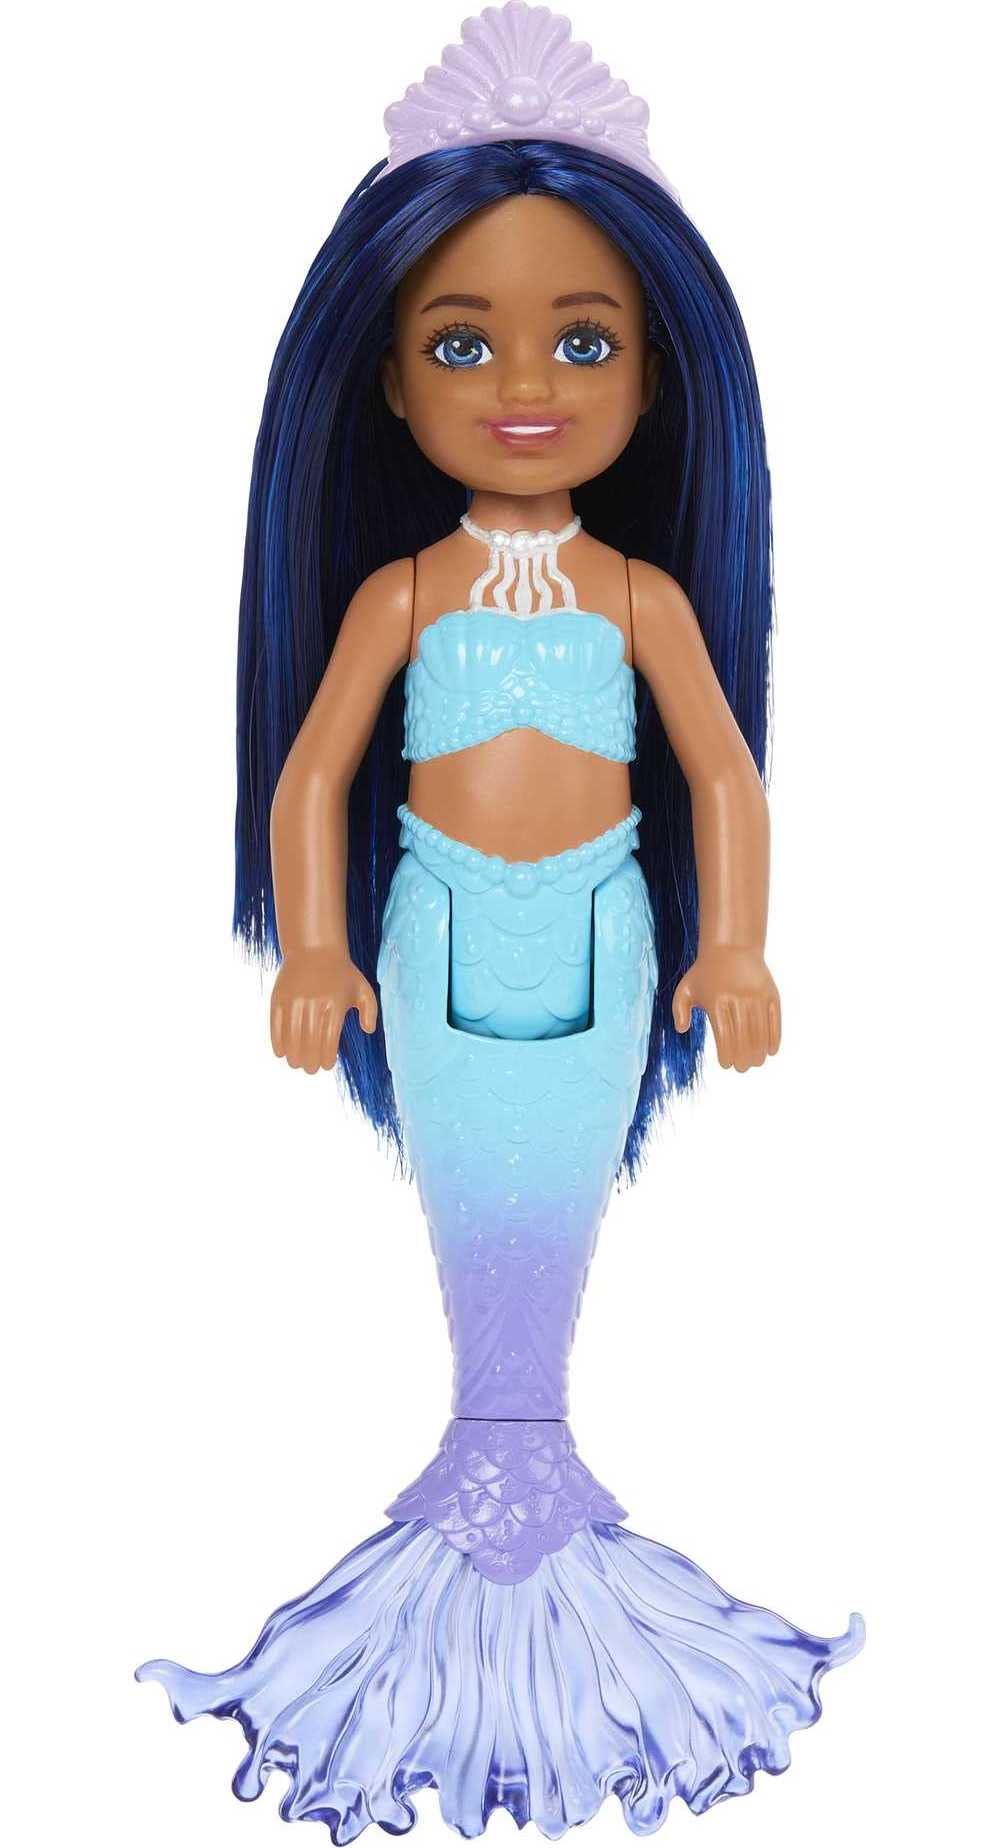 6.3" Barbie Mermaid Chelsea Doll with Midnight Blue Hair and Ombre Tail $4.79 + Free Shipping w/ Prime or on $35+